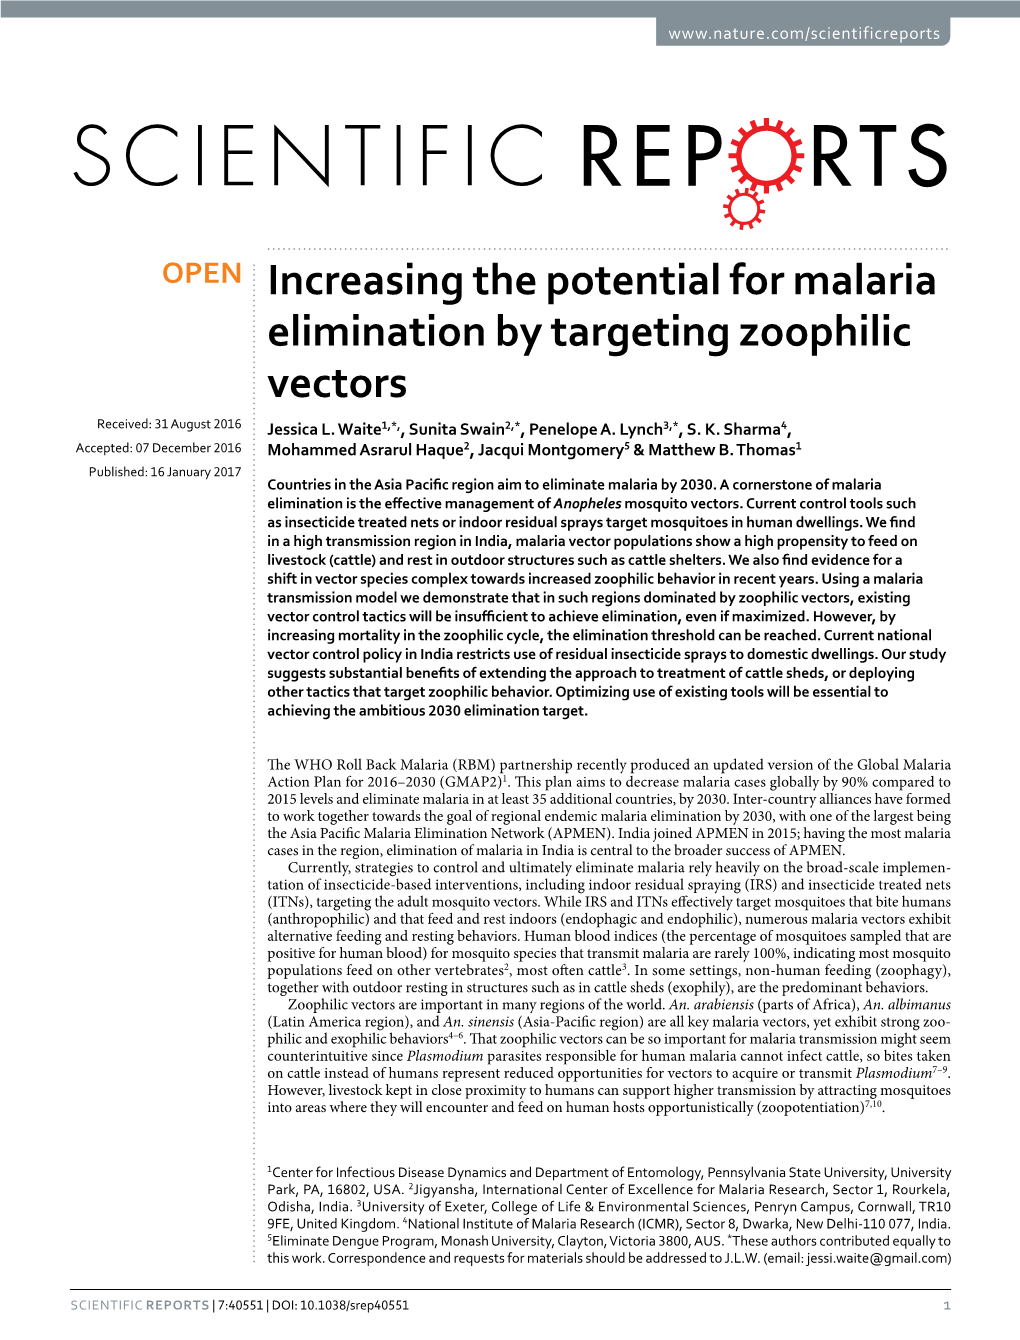 Increasing the Potential for Malaria Elimination by Targeting Zoophilic Vectors Received: 31 August 2016 Jessica L